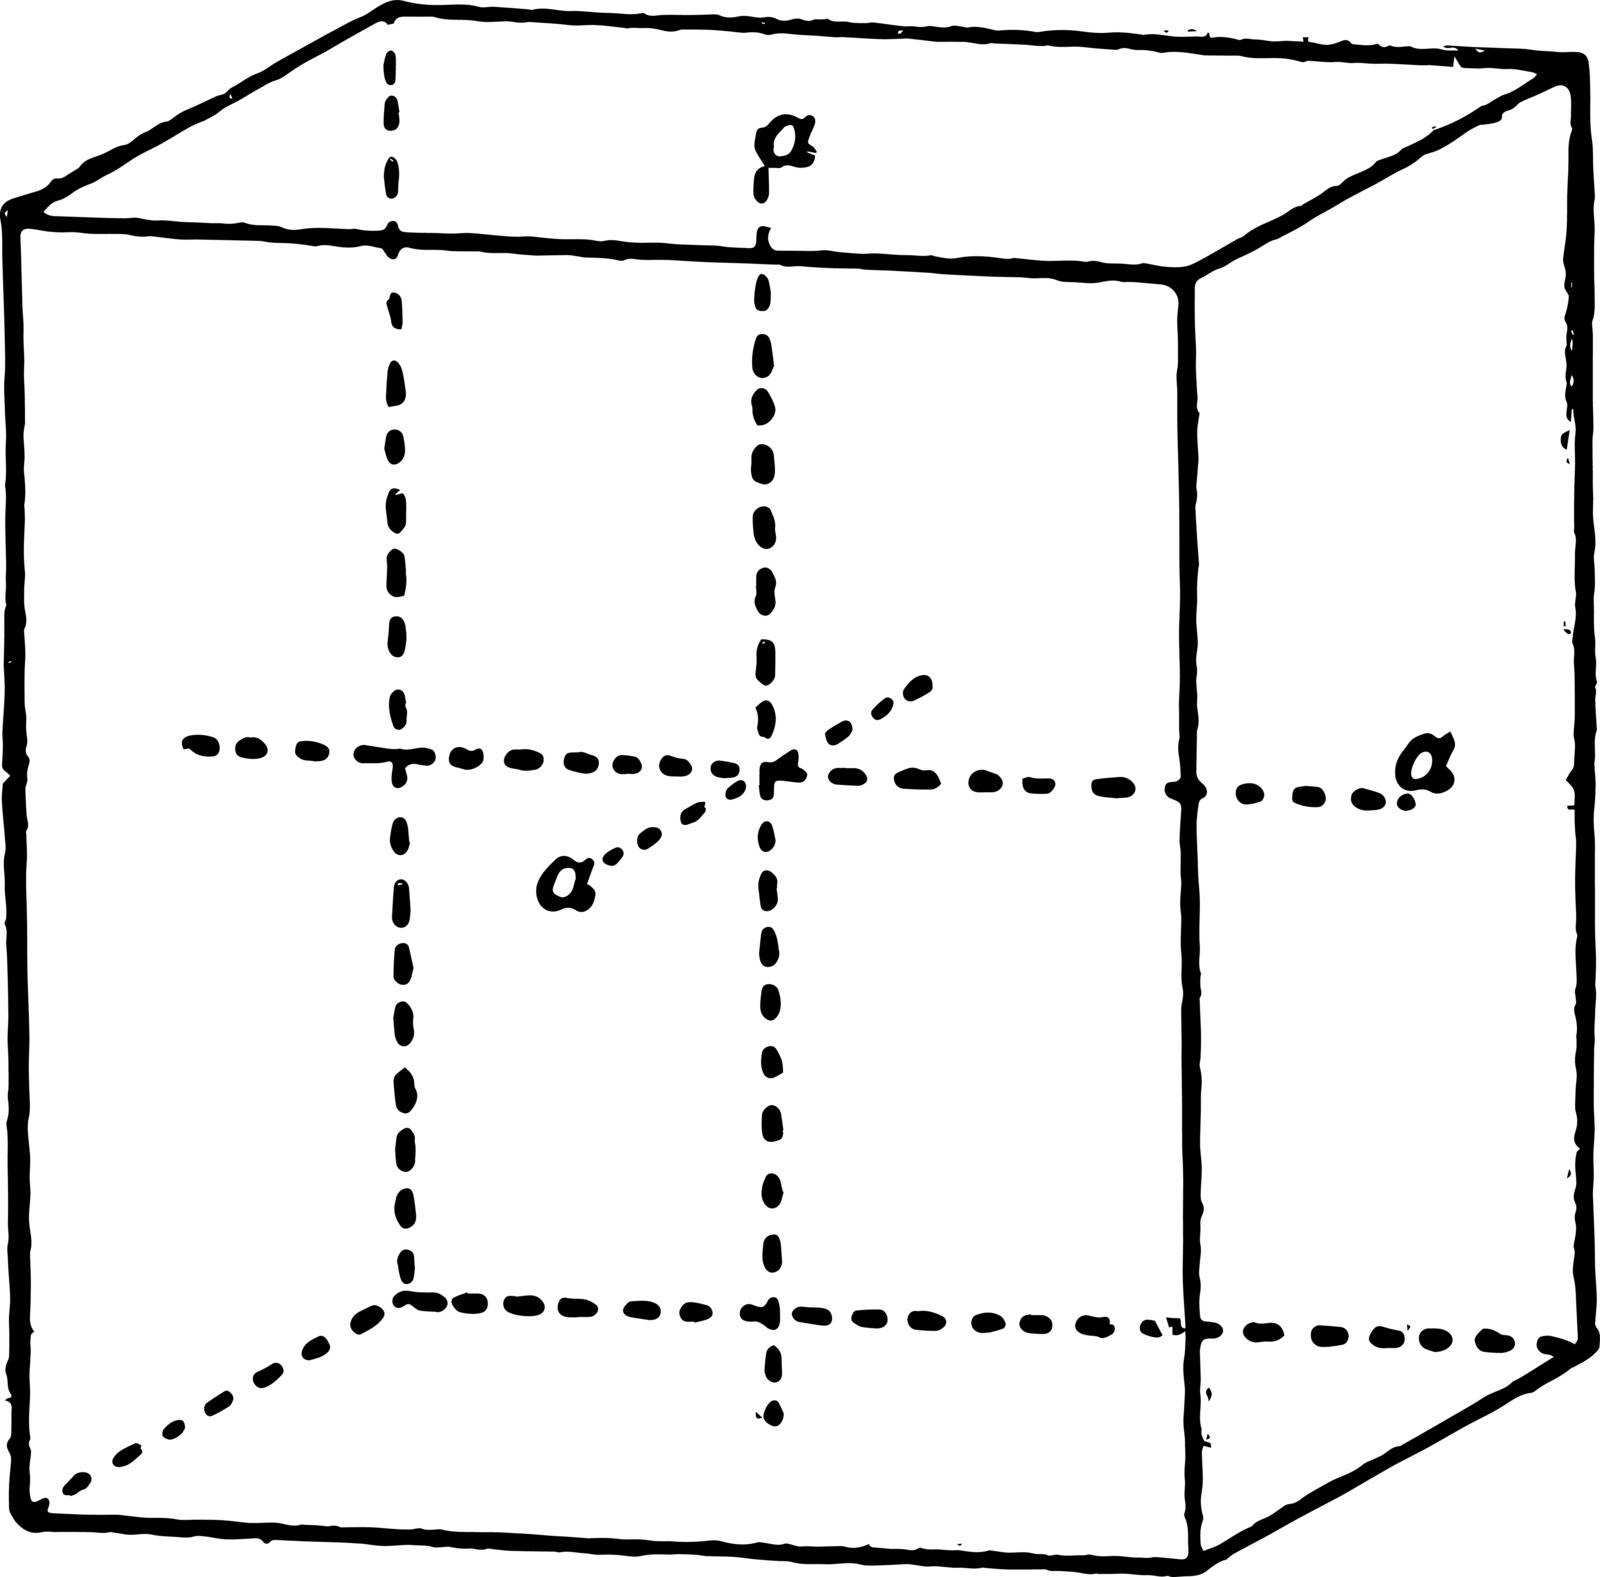 The image shows the main shapes of the rectangular prism of the isometric system. Rectangular prism. It has the same cross section along a length, which makes it a prism, vintage line drawing or engraving illustration.